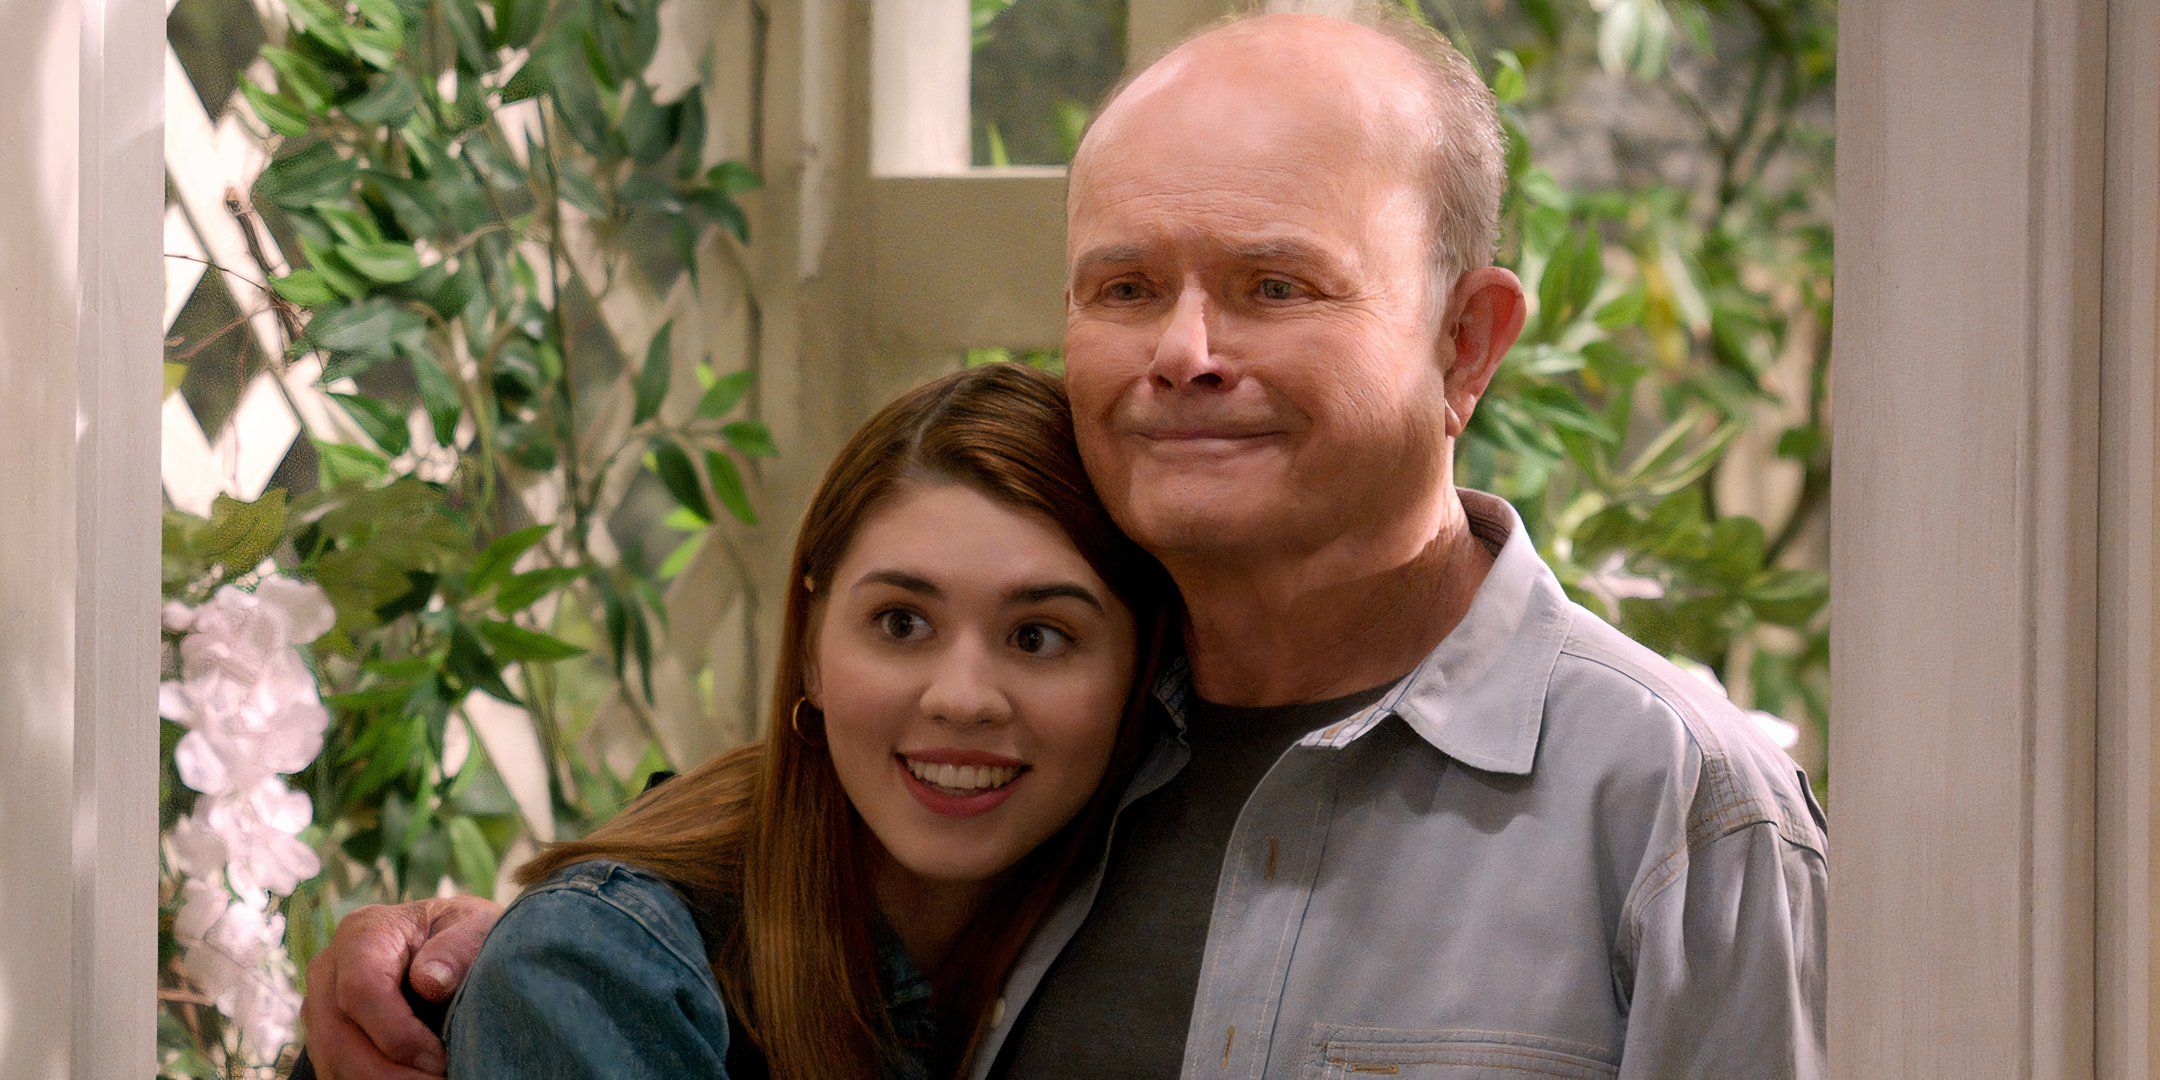 Kurtwood Smith as Red looking happy while hugging Leia in That '90s Show season 2